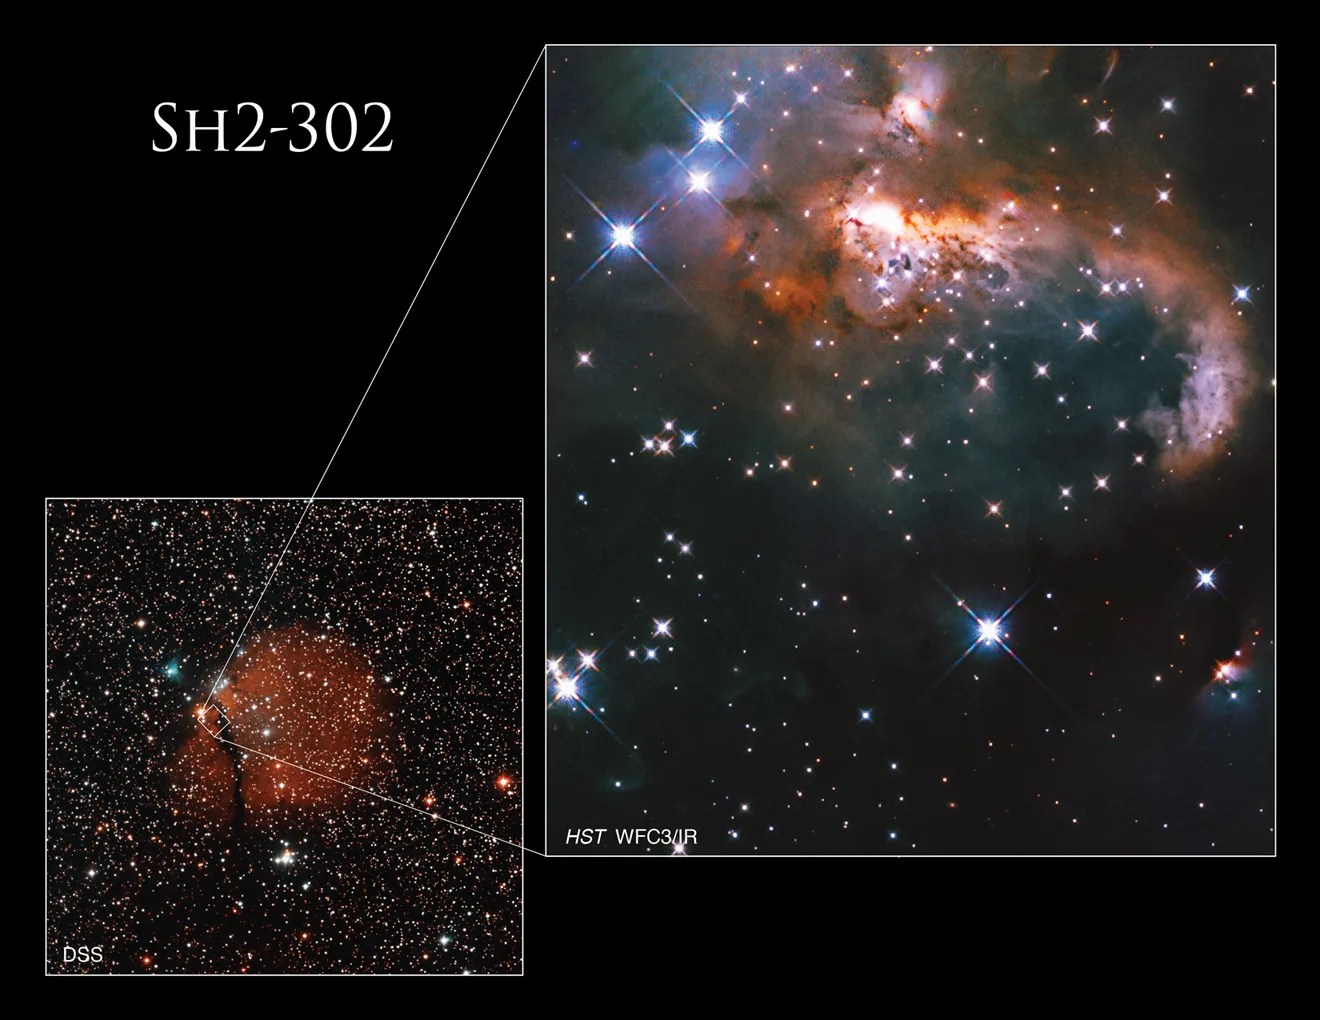 Lower left shows the position of the Hubble image in relation to the entire Snowman Nebula. Upper right is the small "comma" shaped section of the nebula Hubble imaged.